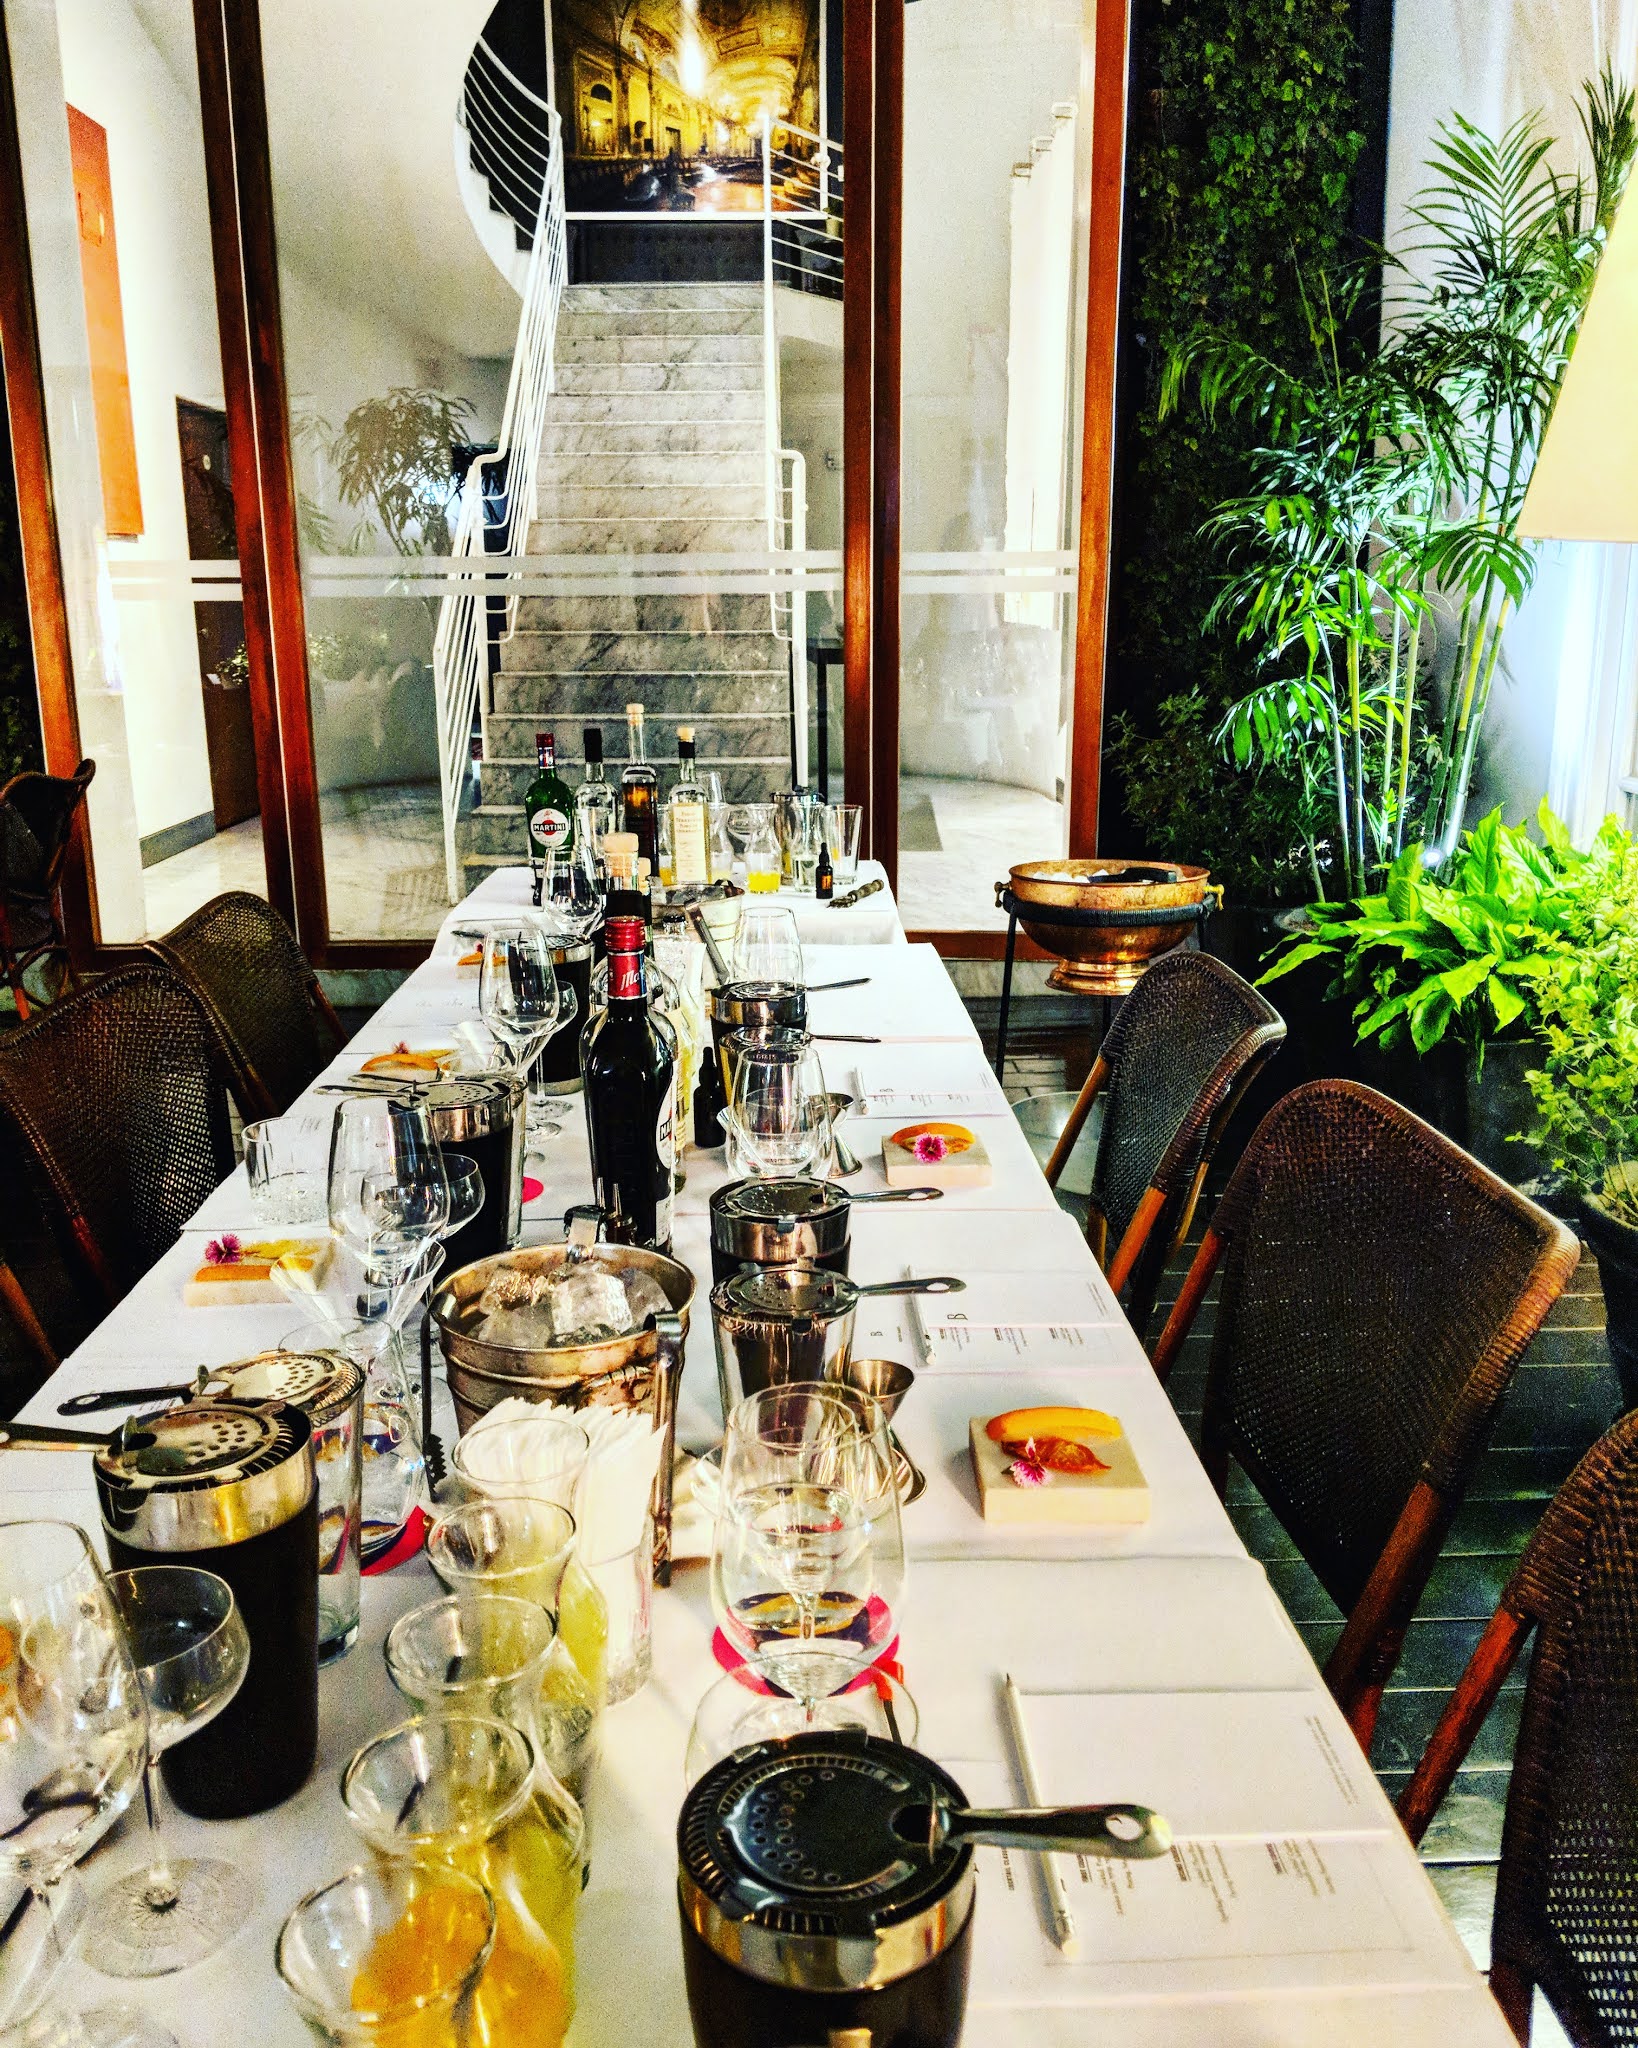 table laid for a pisco sour cocktail class in lima